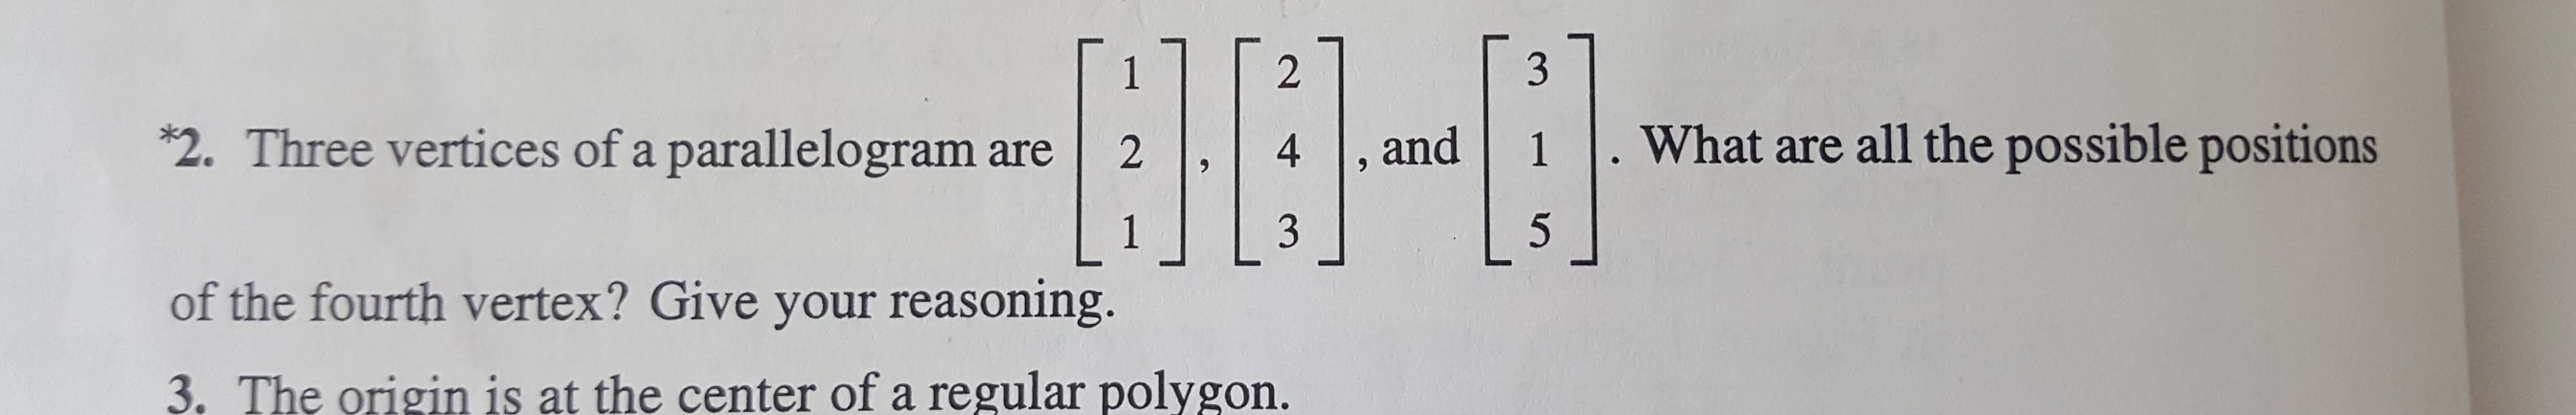 3
2
1
What are all the possible positions
*2. Three vertices of a parallelogram are
1
4
and
2
9
L:
5
3
1
of the fourth vertex? Give your reasoning.
3. The origin is at the center of a regular polygon.
